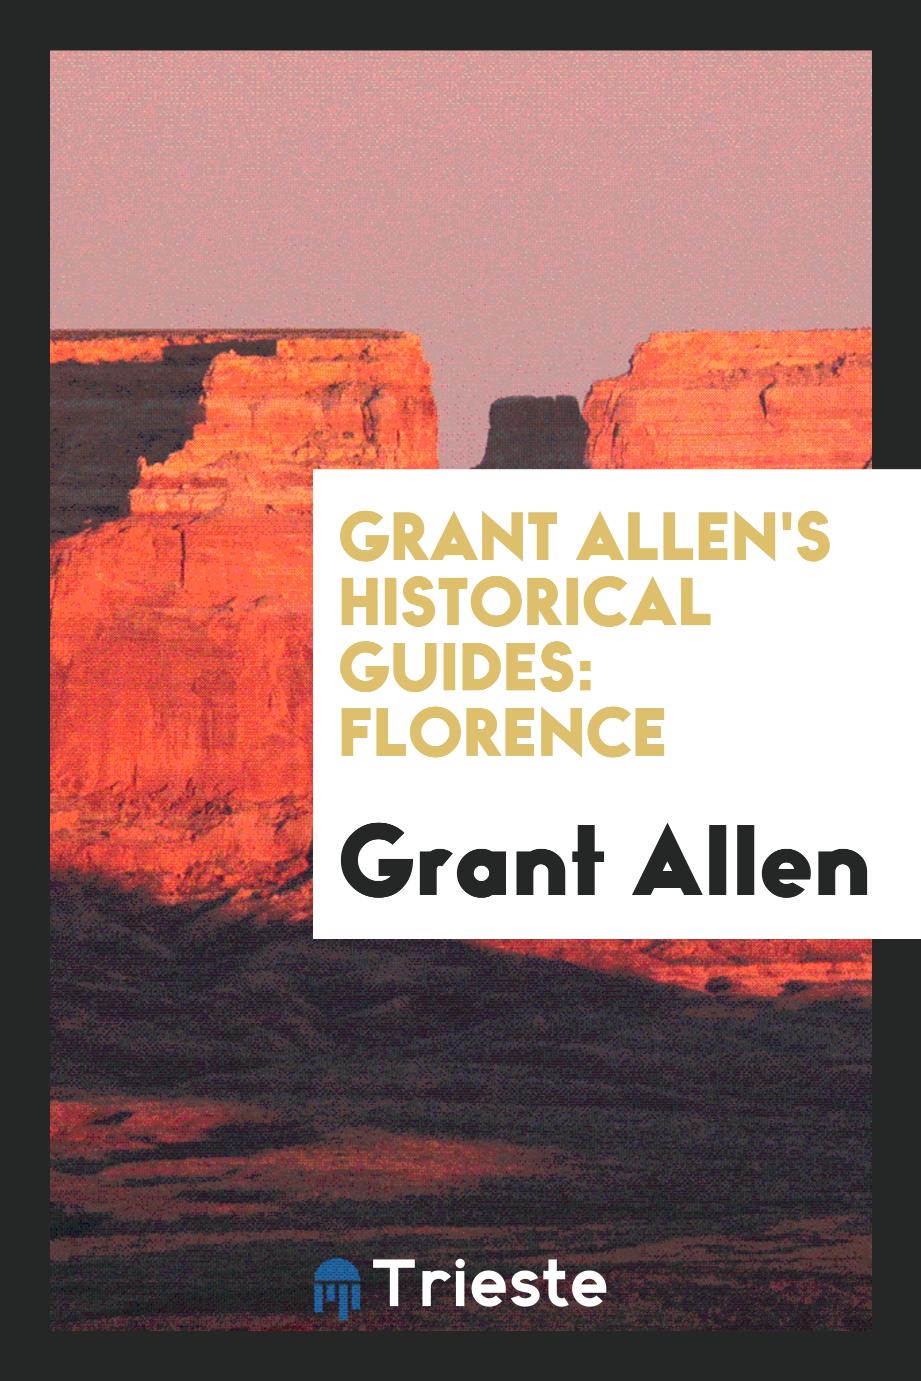 Grant Allen's historical guides: Florence